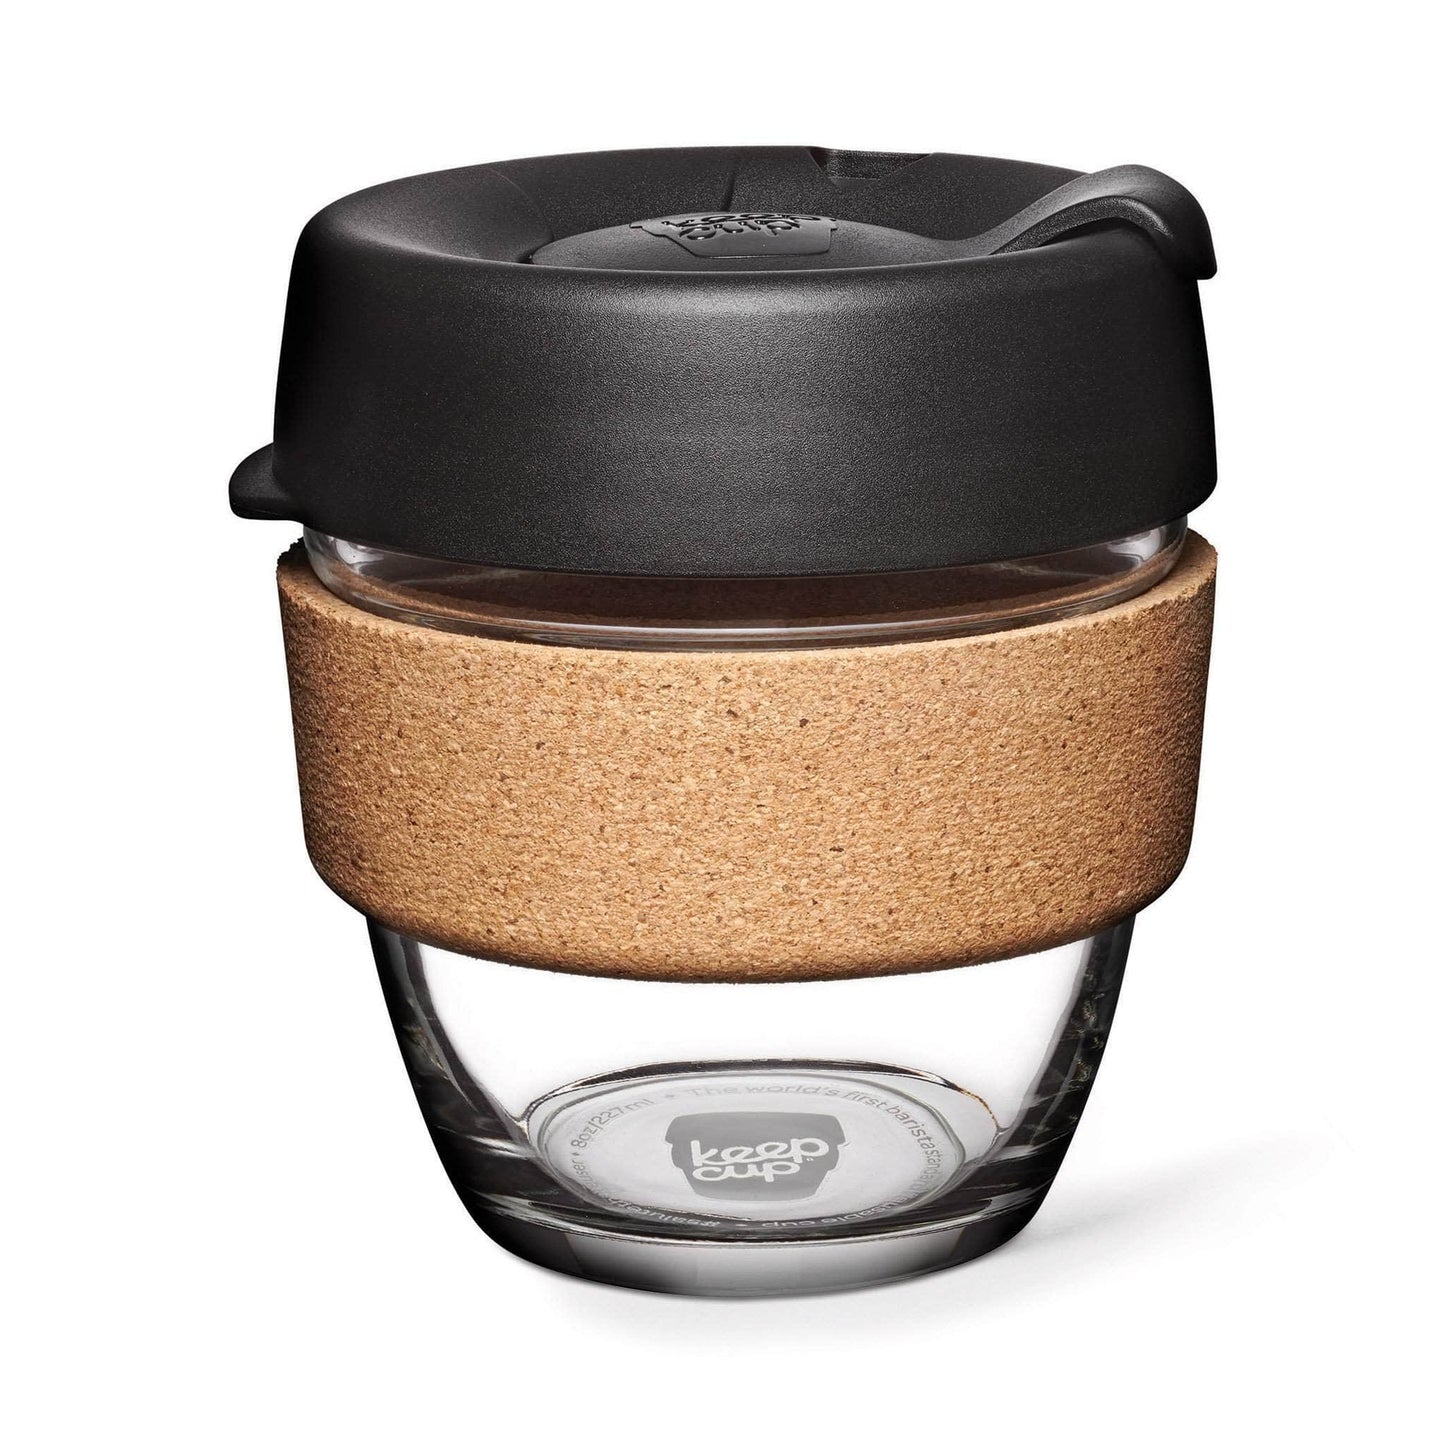 Keepcup Brew Cork Coffee Cups Keepcup Brew 8oz Glass Coffee Cup With Cork Band - Espresso